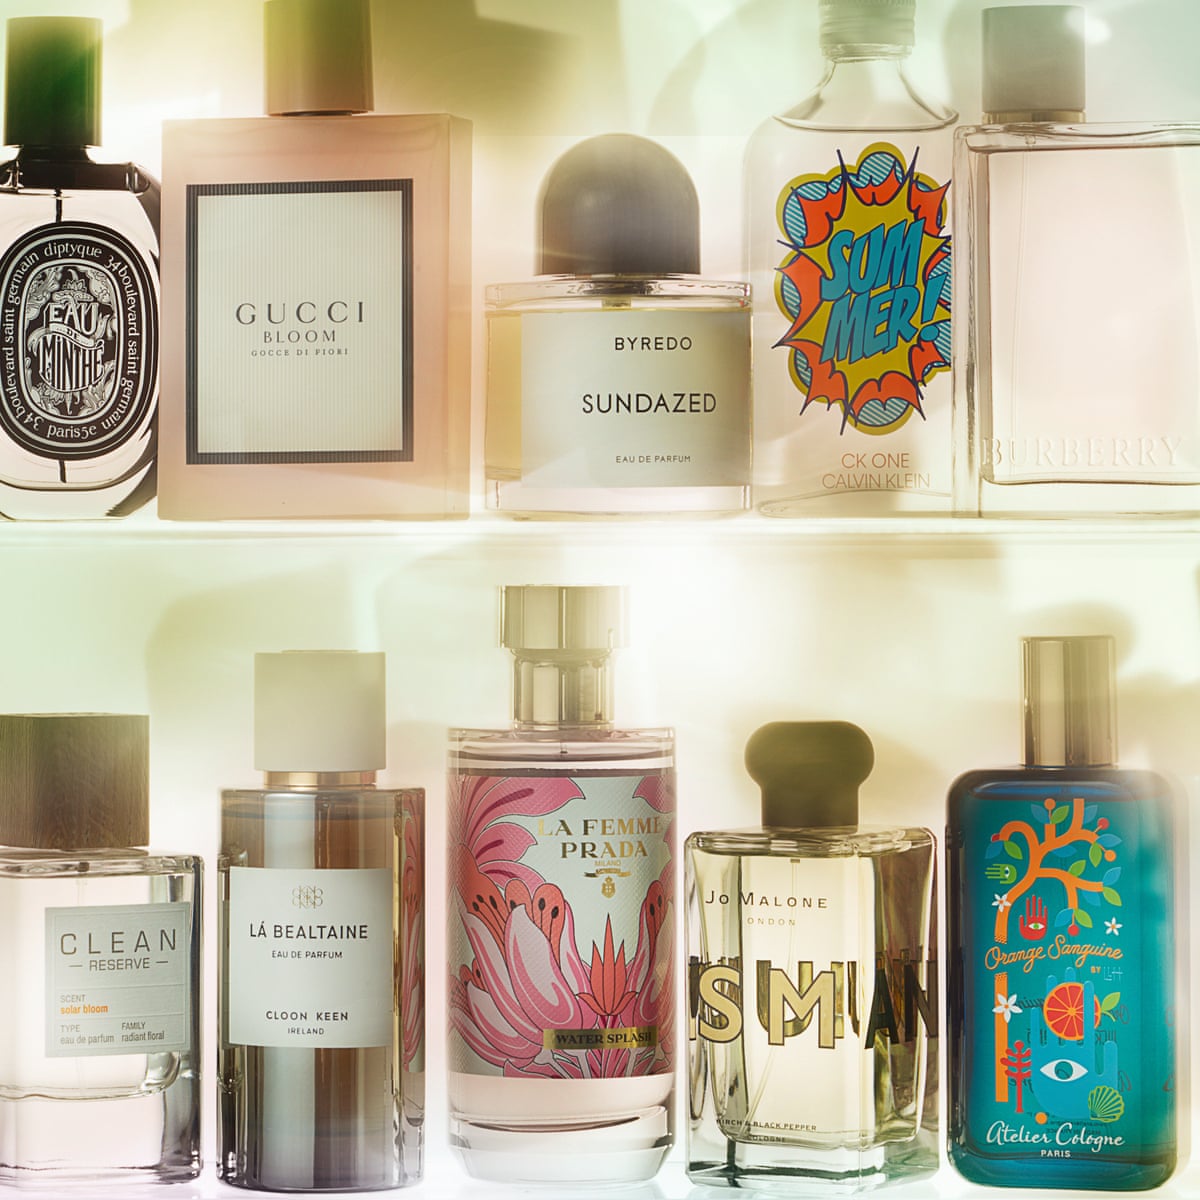 Perfumes & Cosmetics - Fragrances, makeup and luxury skincare – LVMH